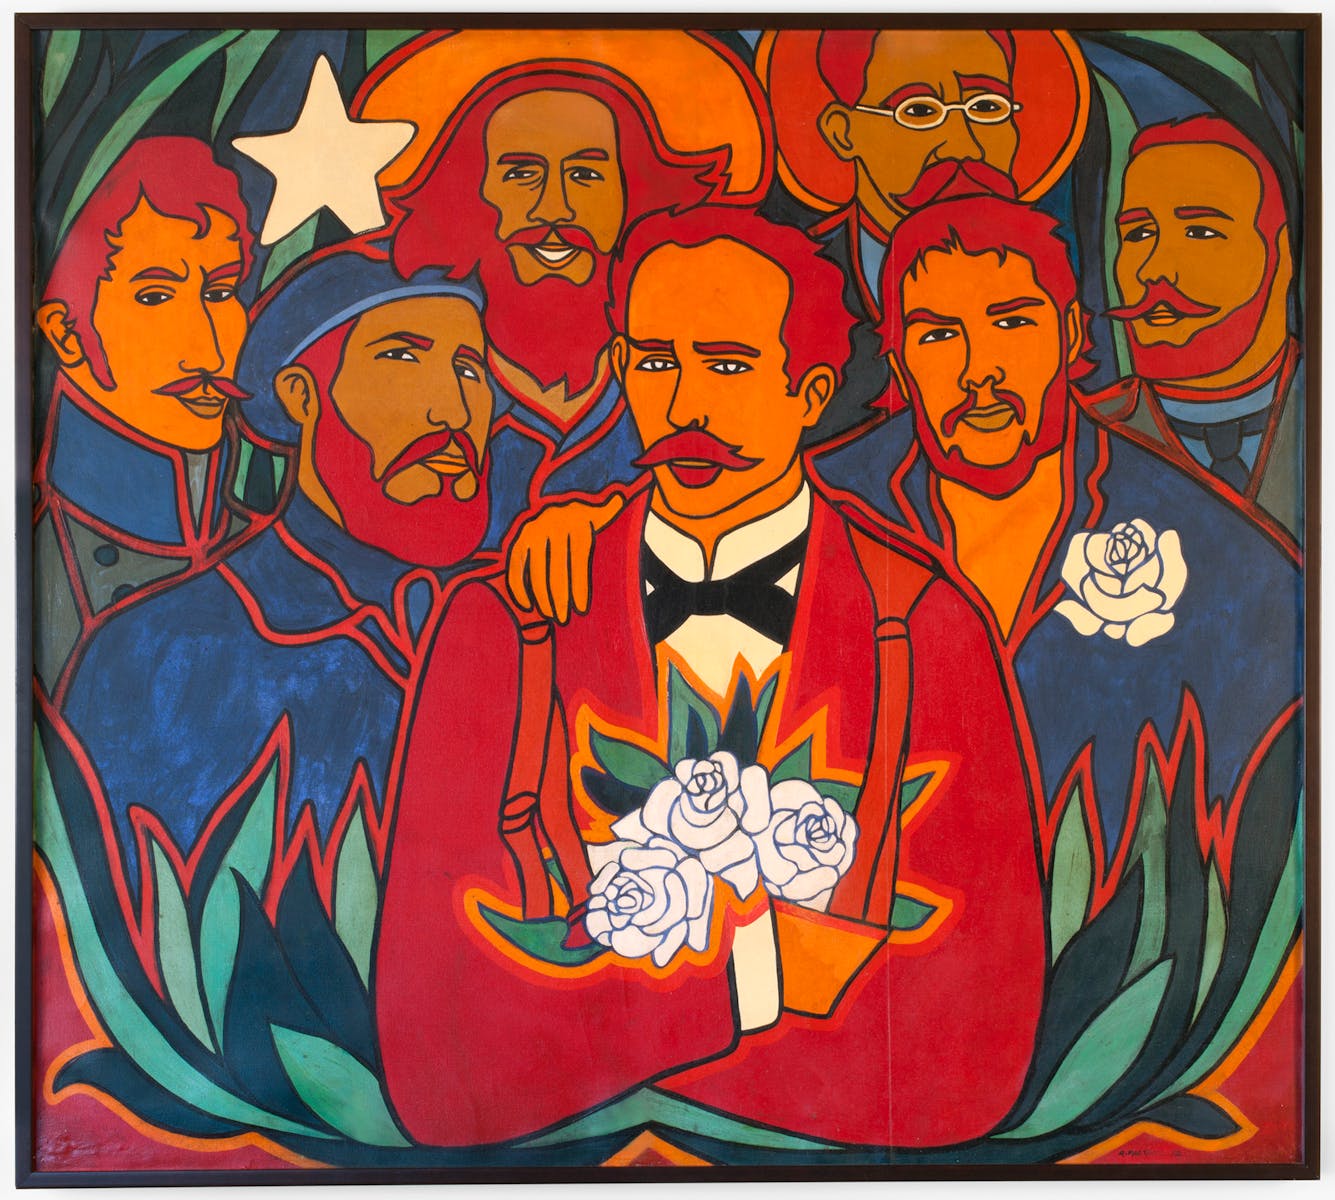 7 Cuban men in a work of orange, blue and ted. One man holding roses.